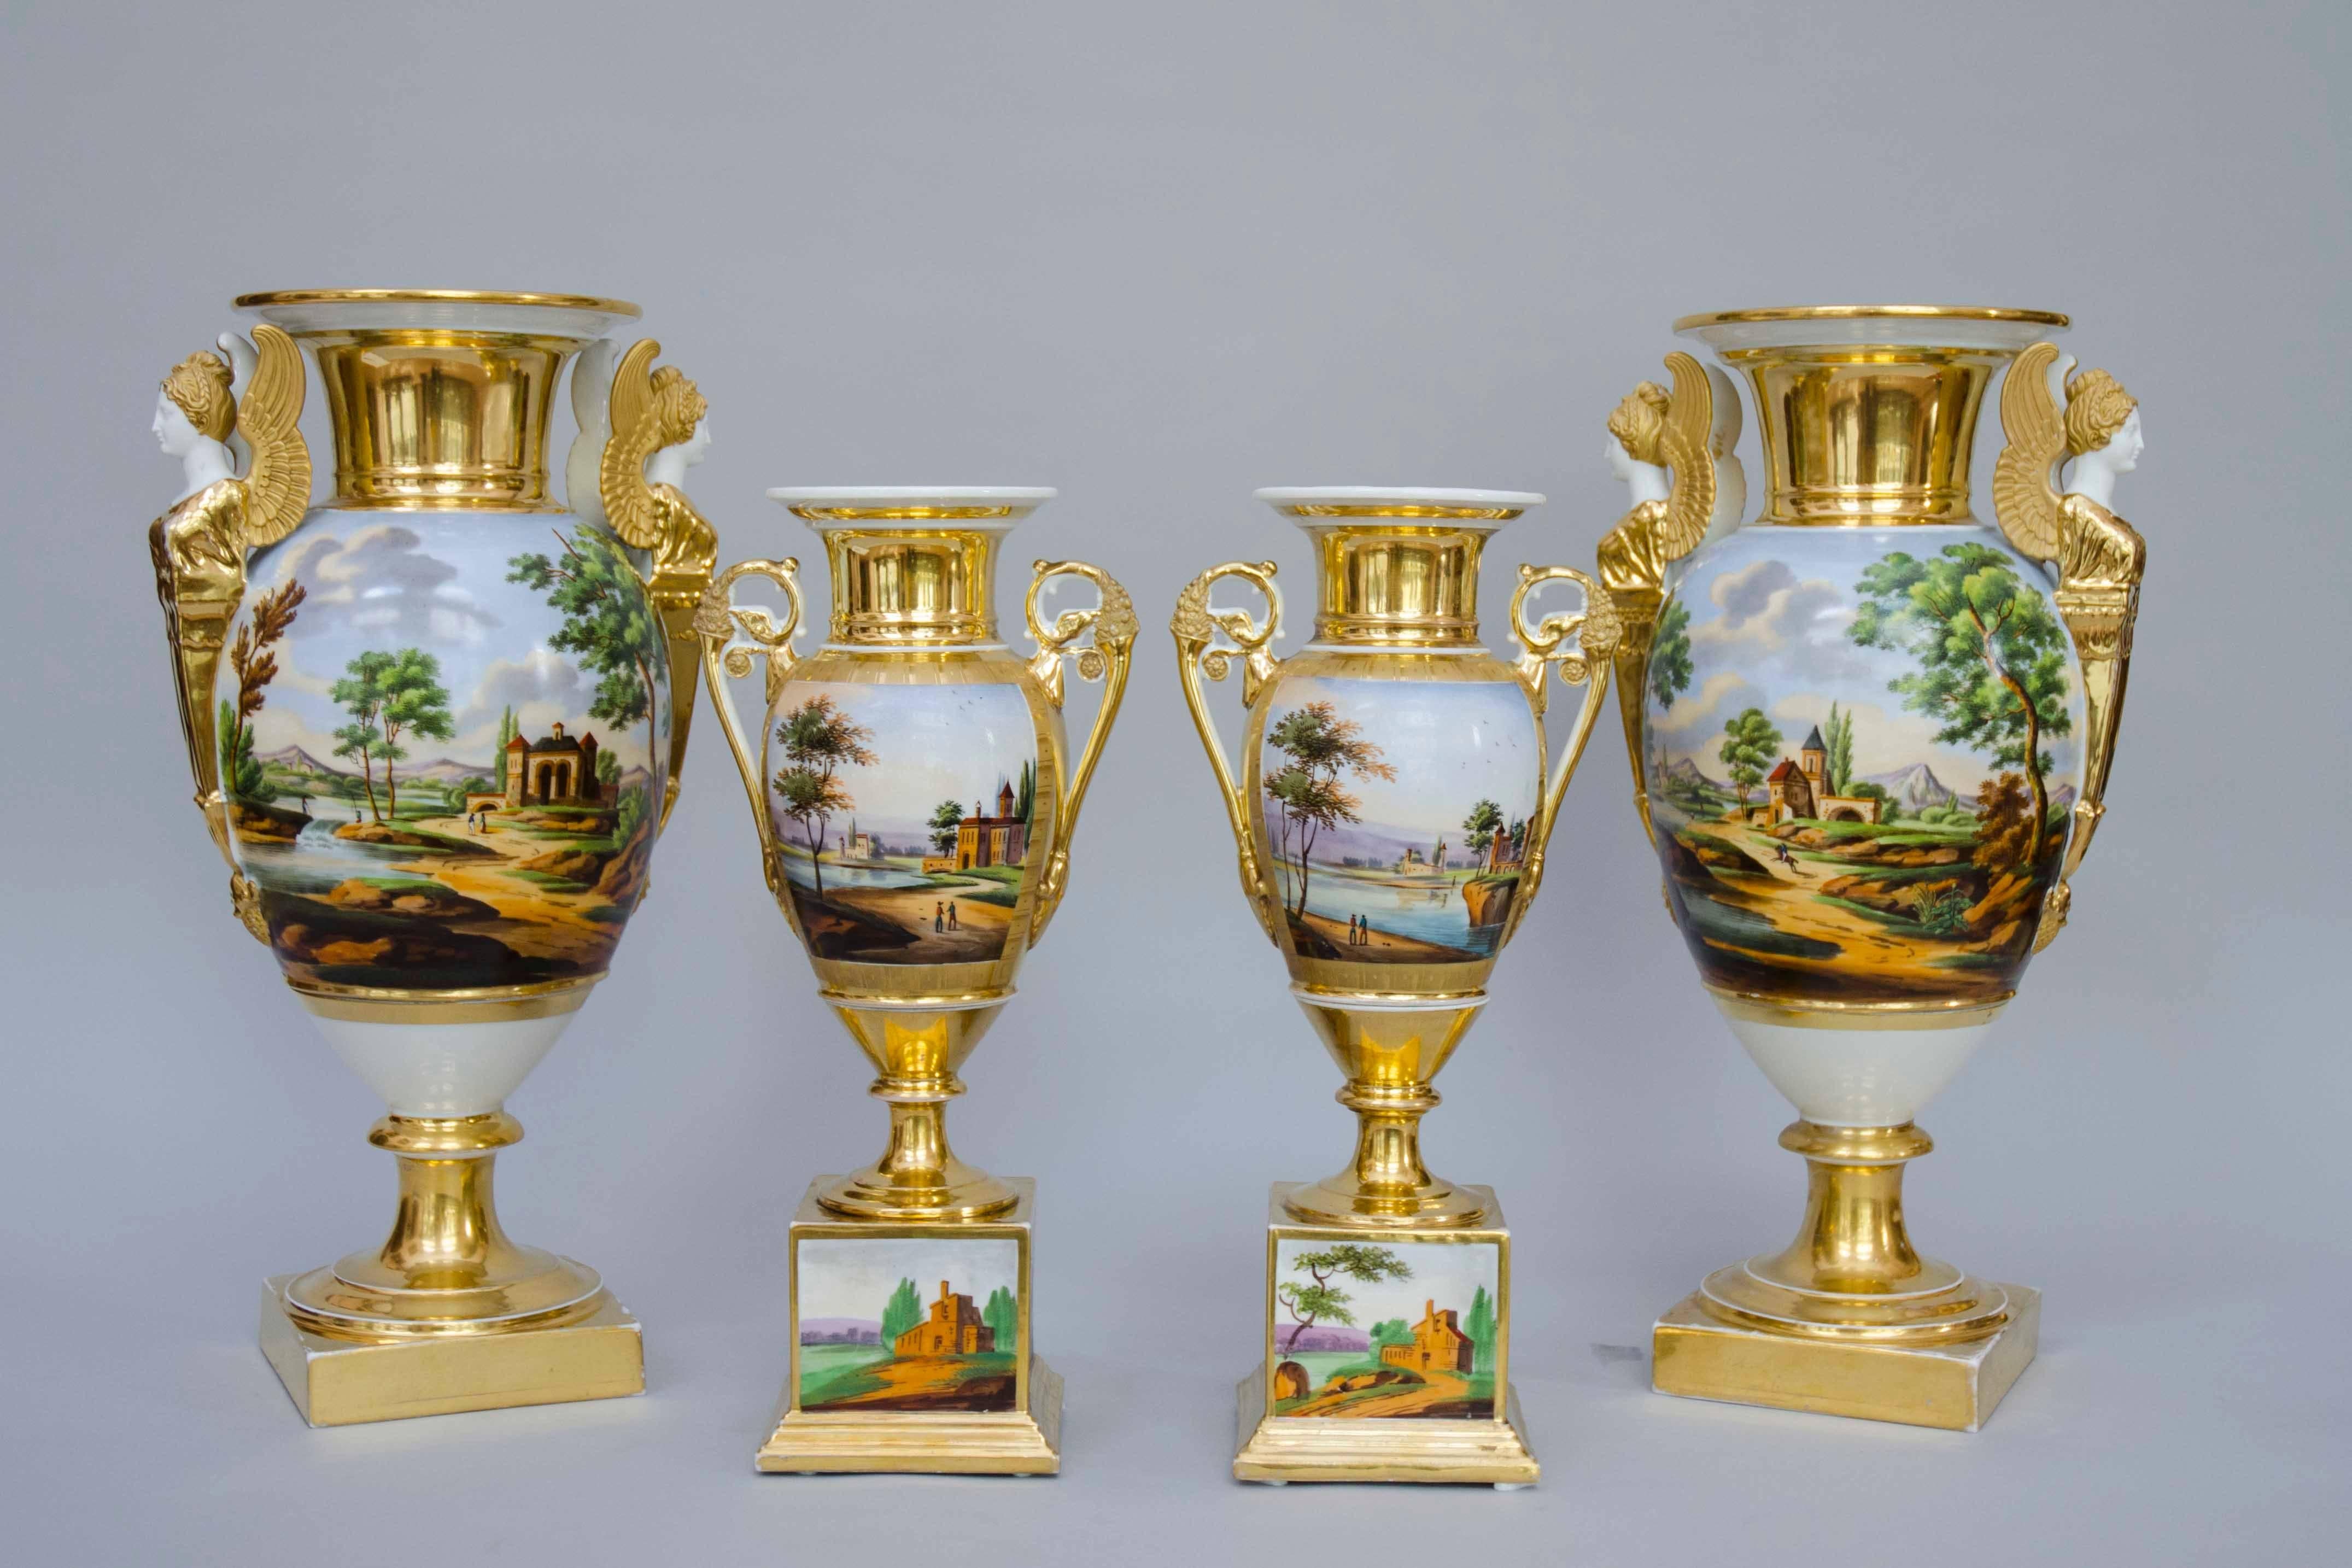 19th Century Squared Based Egg Shaped Vases with Italian Landscapes, Brussels For Sale 2